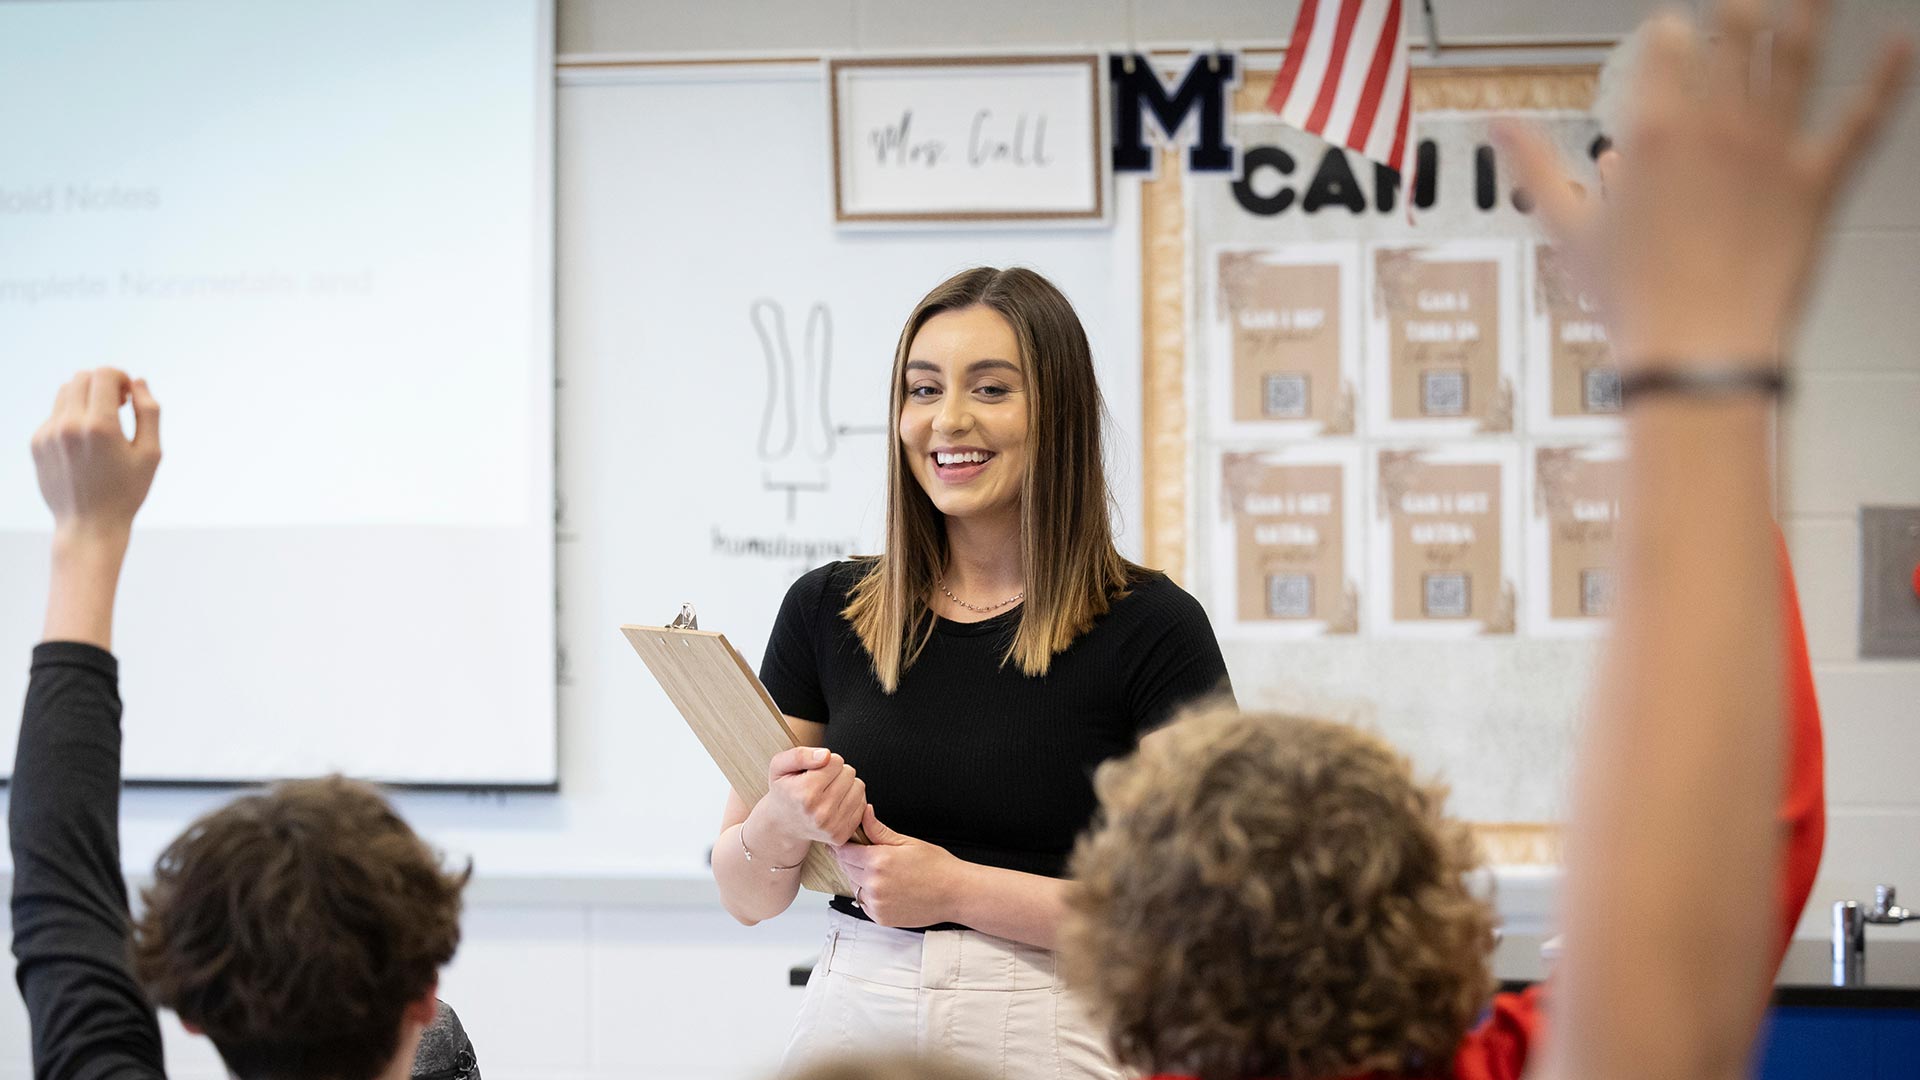 A high school science teacher smiles as her students raise their hands to answer a question during class.